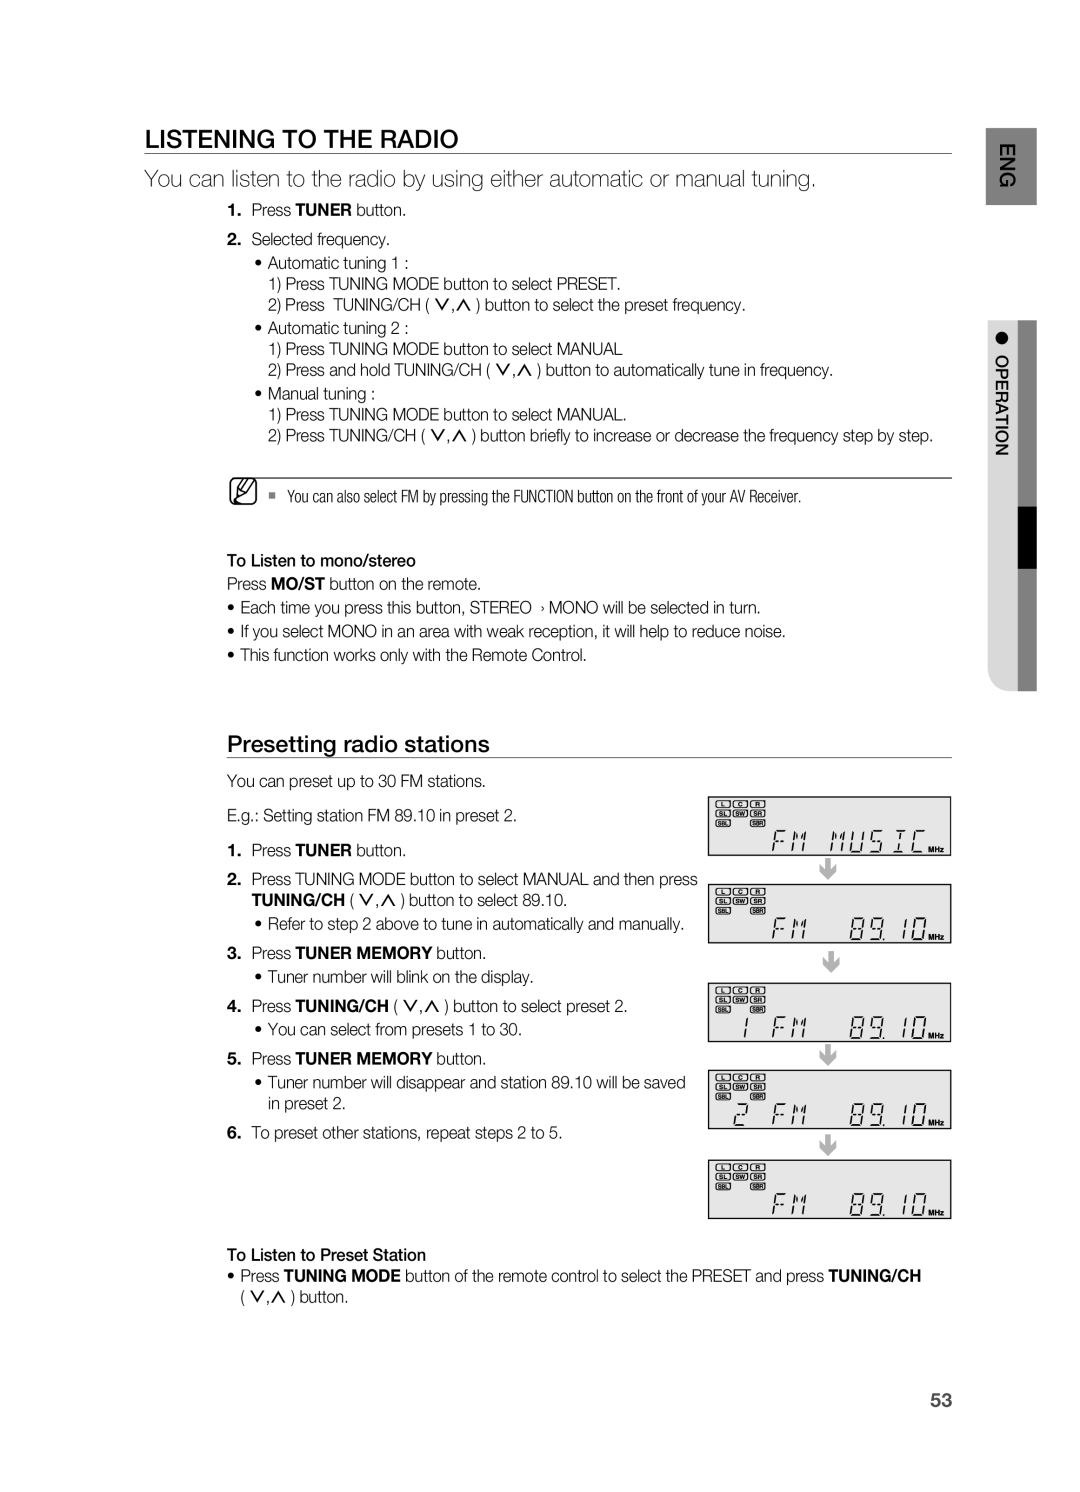 Samsung HT-AS730S user manual LISTENING to the Radio, Presetting radio stations 